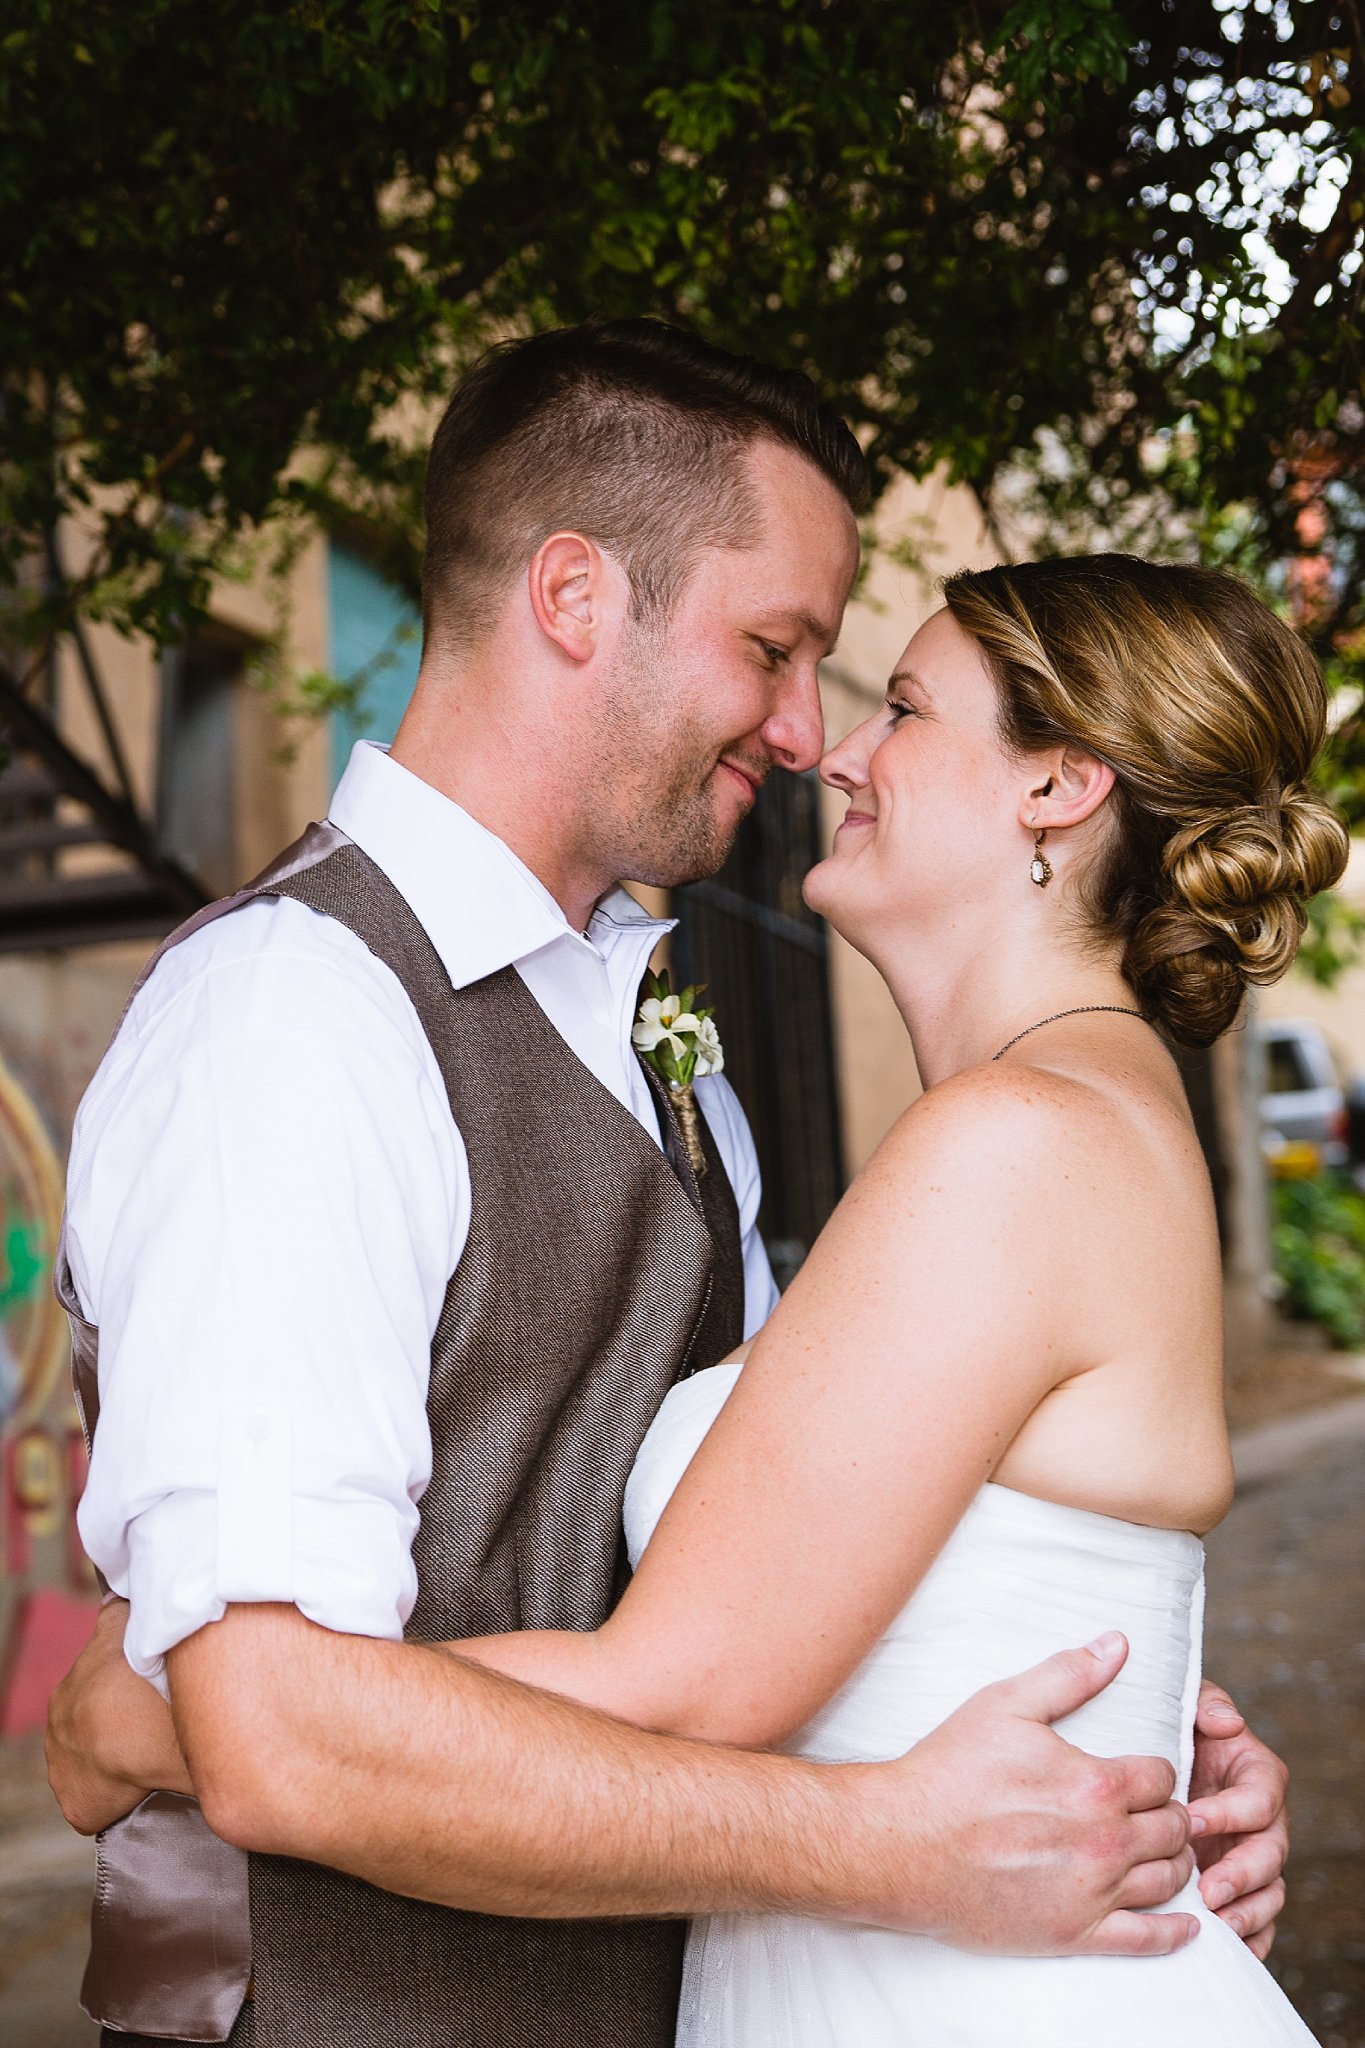 A sweet moment between the bride and groom by PMA Photography.